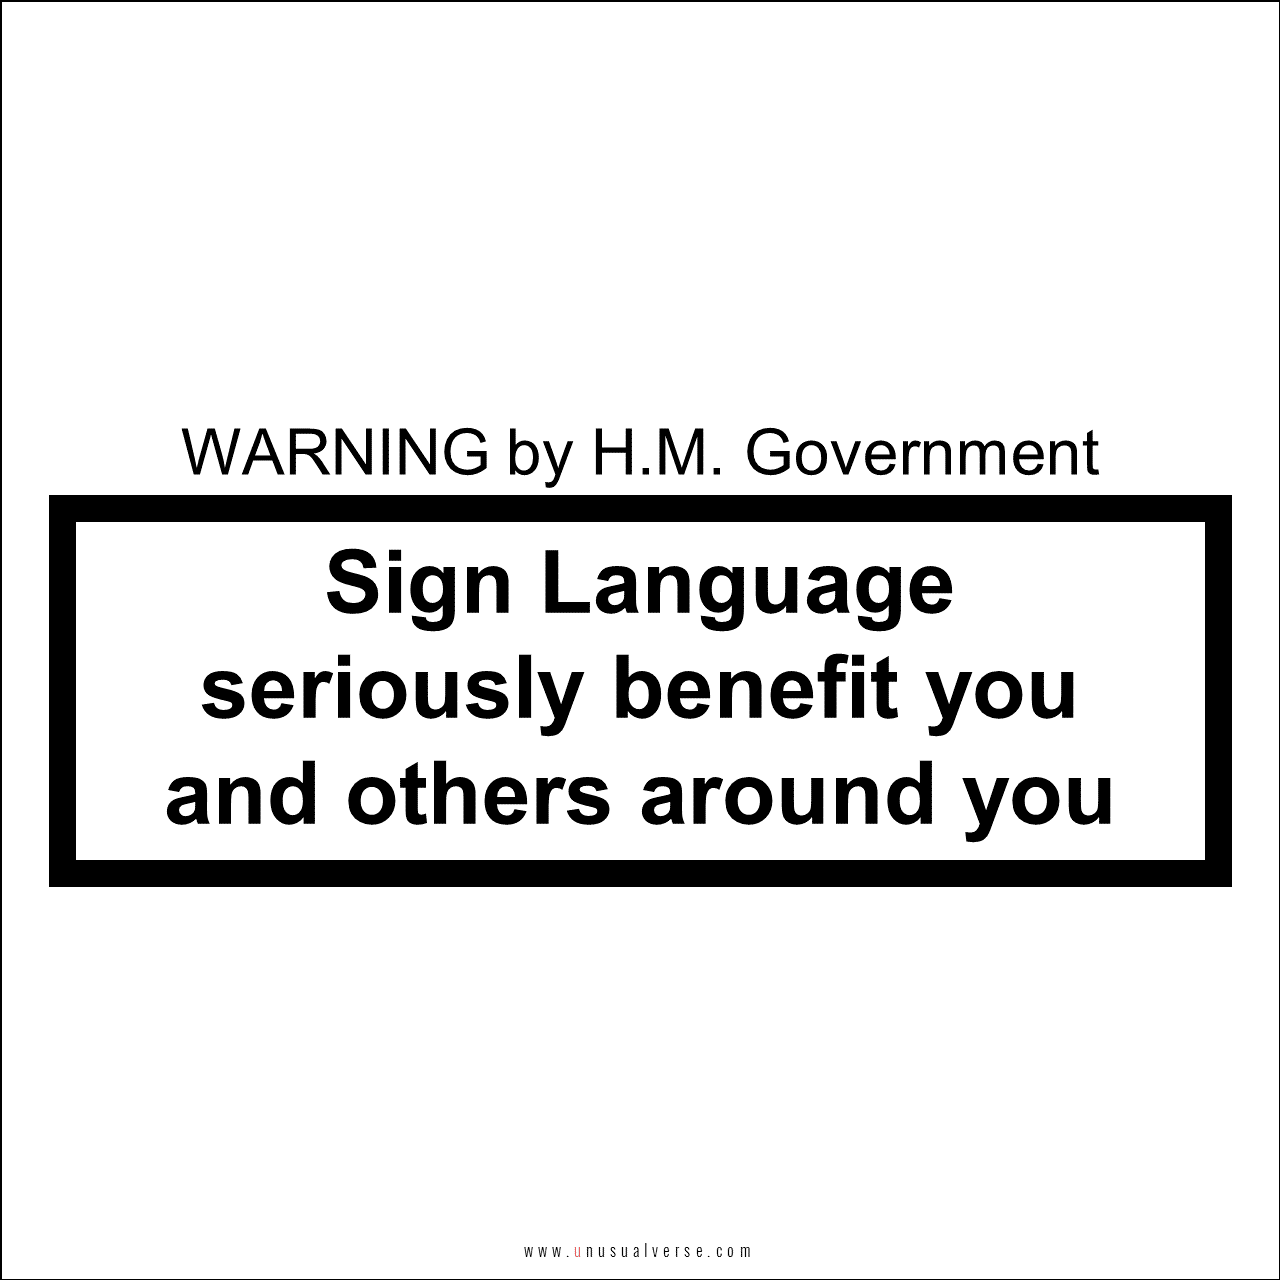 Warning by H.M. Goverment: Sign Language seriously benefit you and others around you